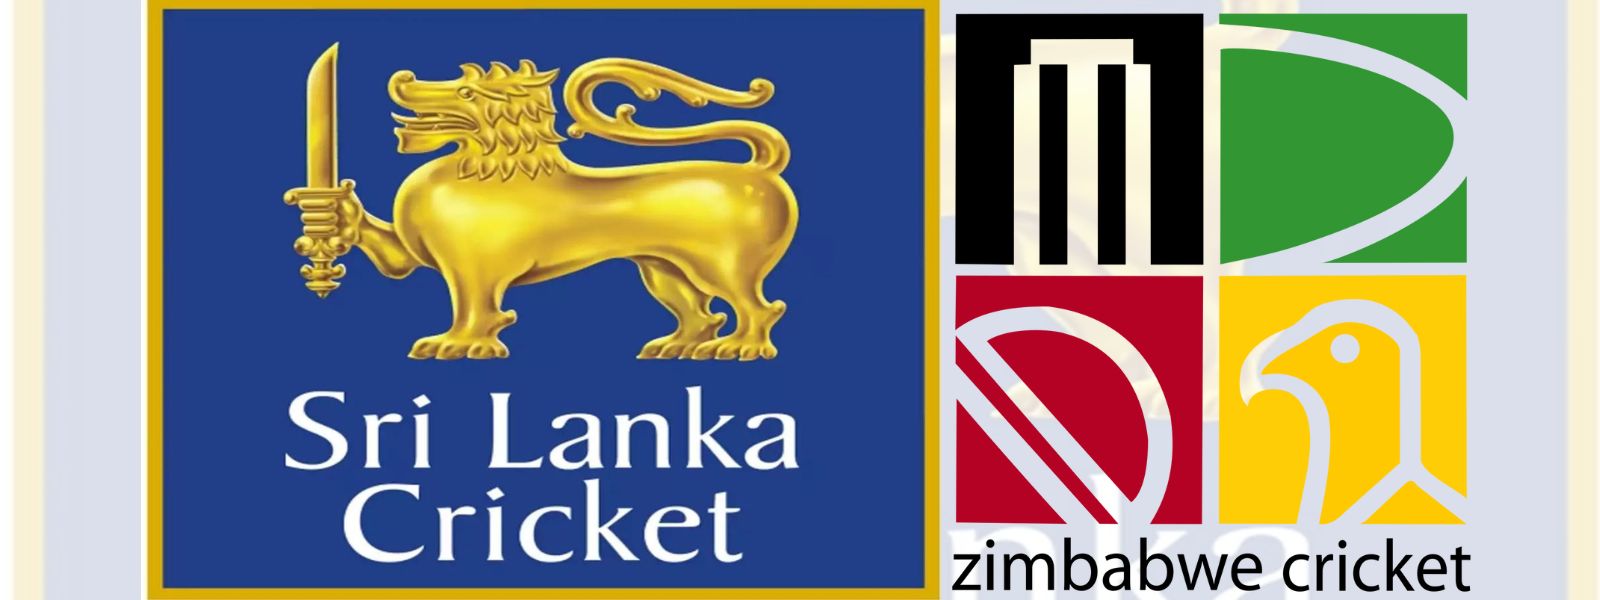 Zimbabwe cricket board approaches ICC for loan | Cricket News - Times of  India